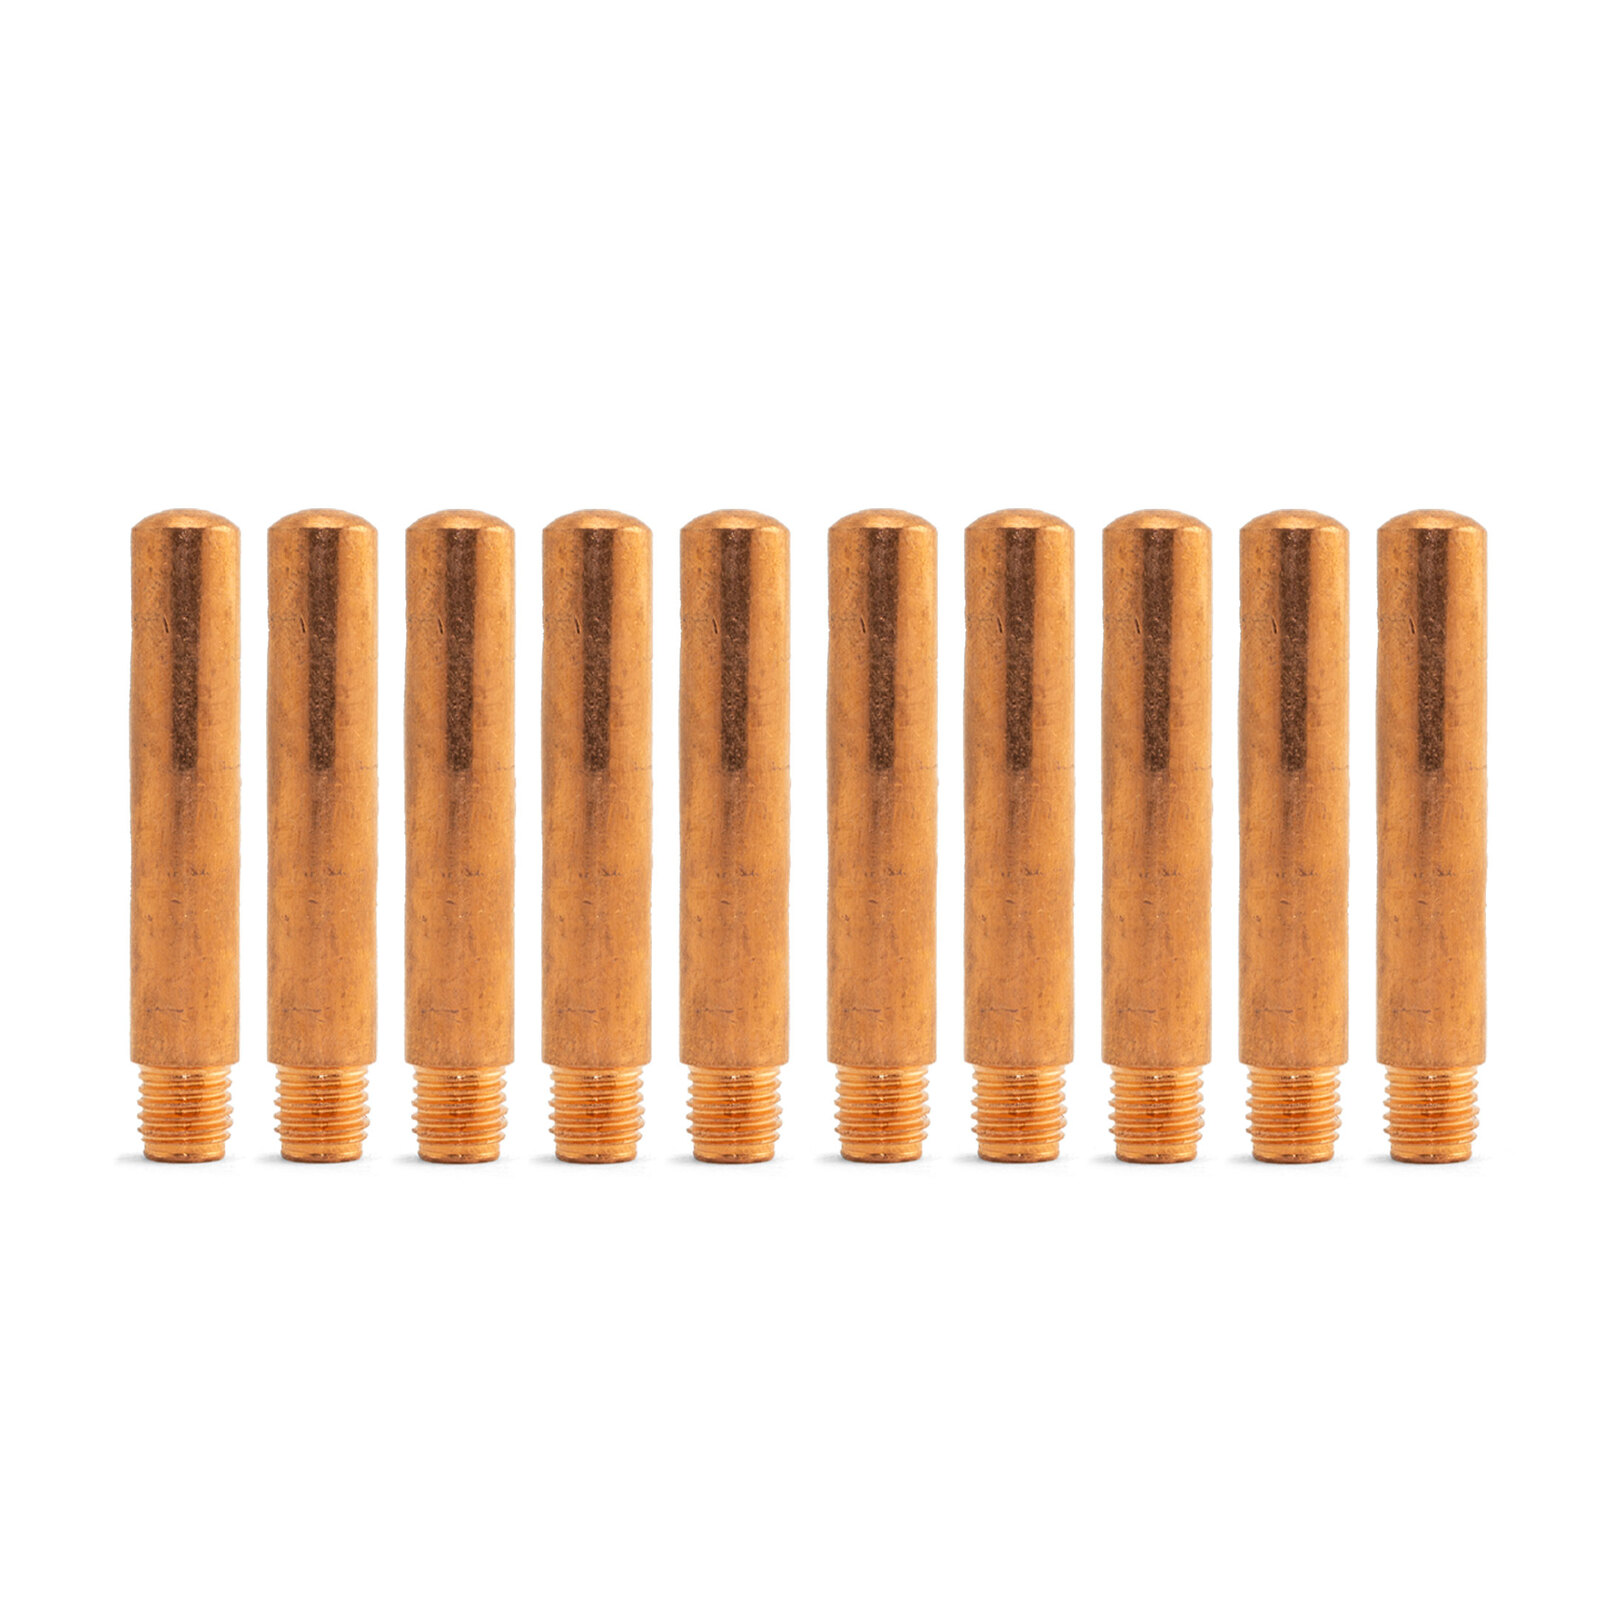 Tweco #5 Style 15H116 MIG Contact Tips - 1.6mm - 10 Each